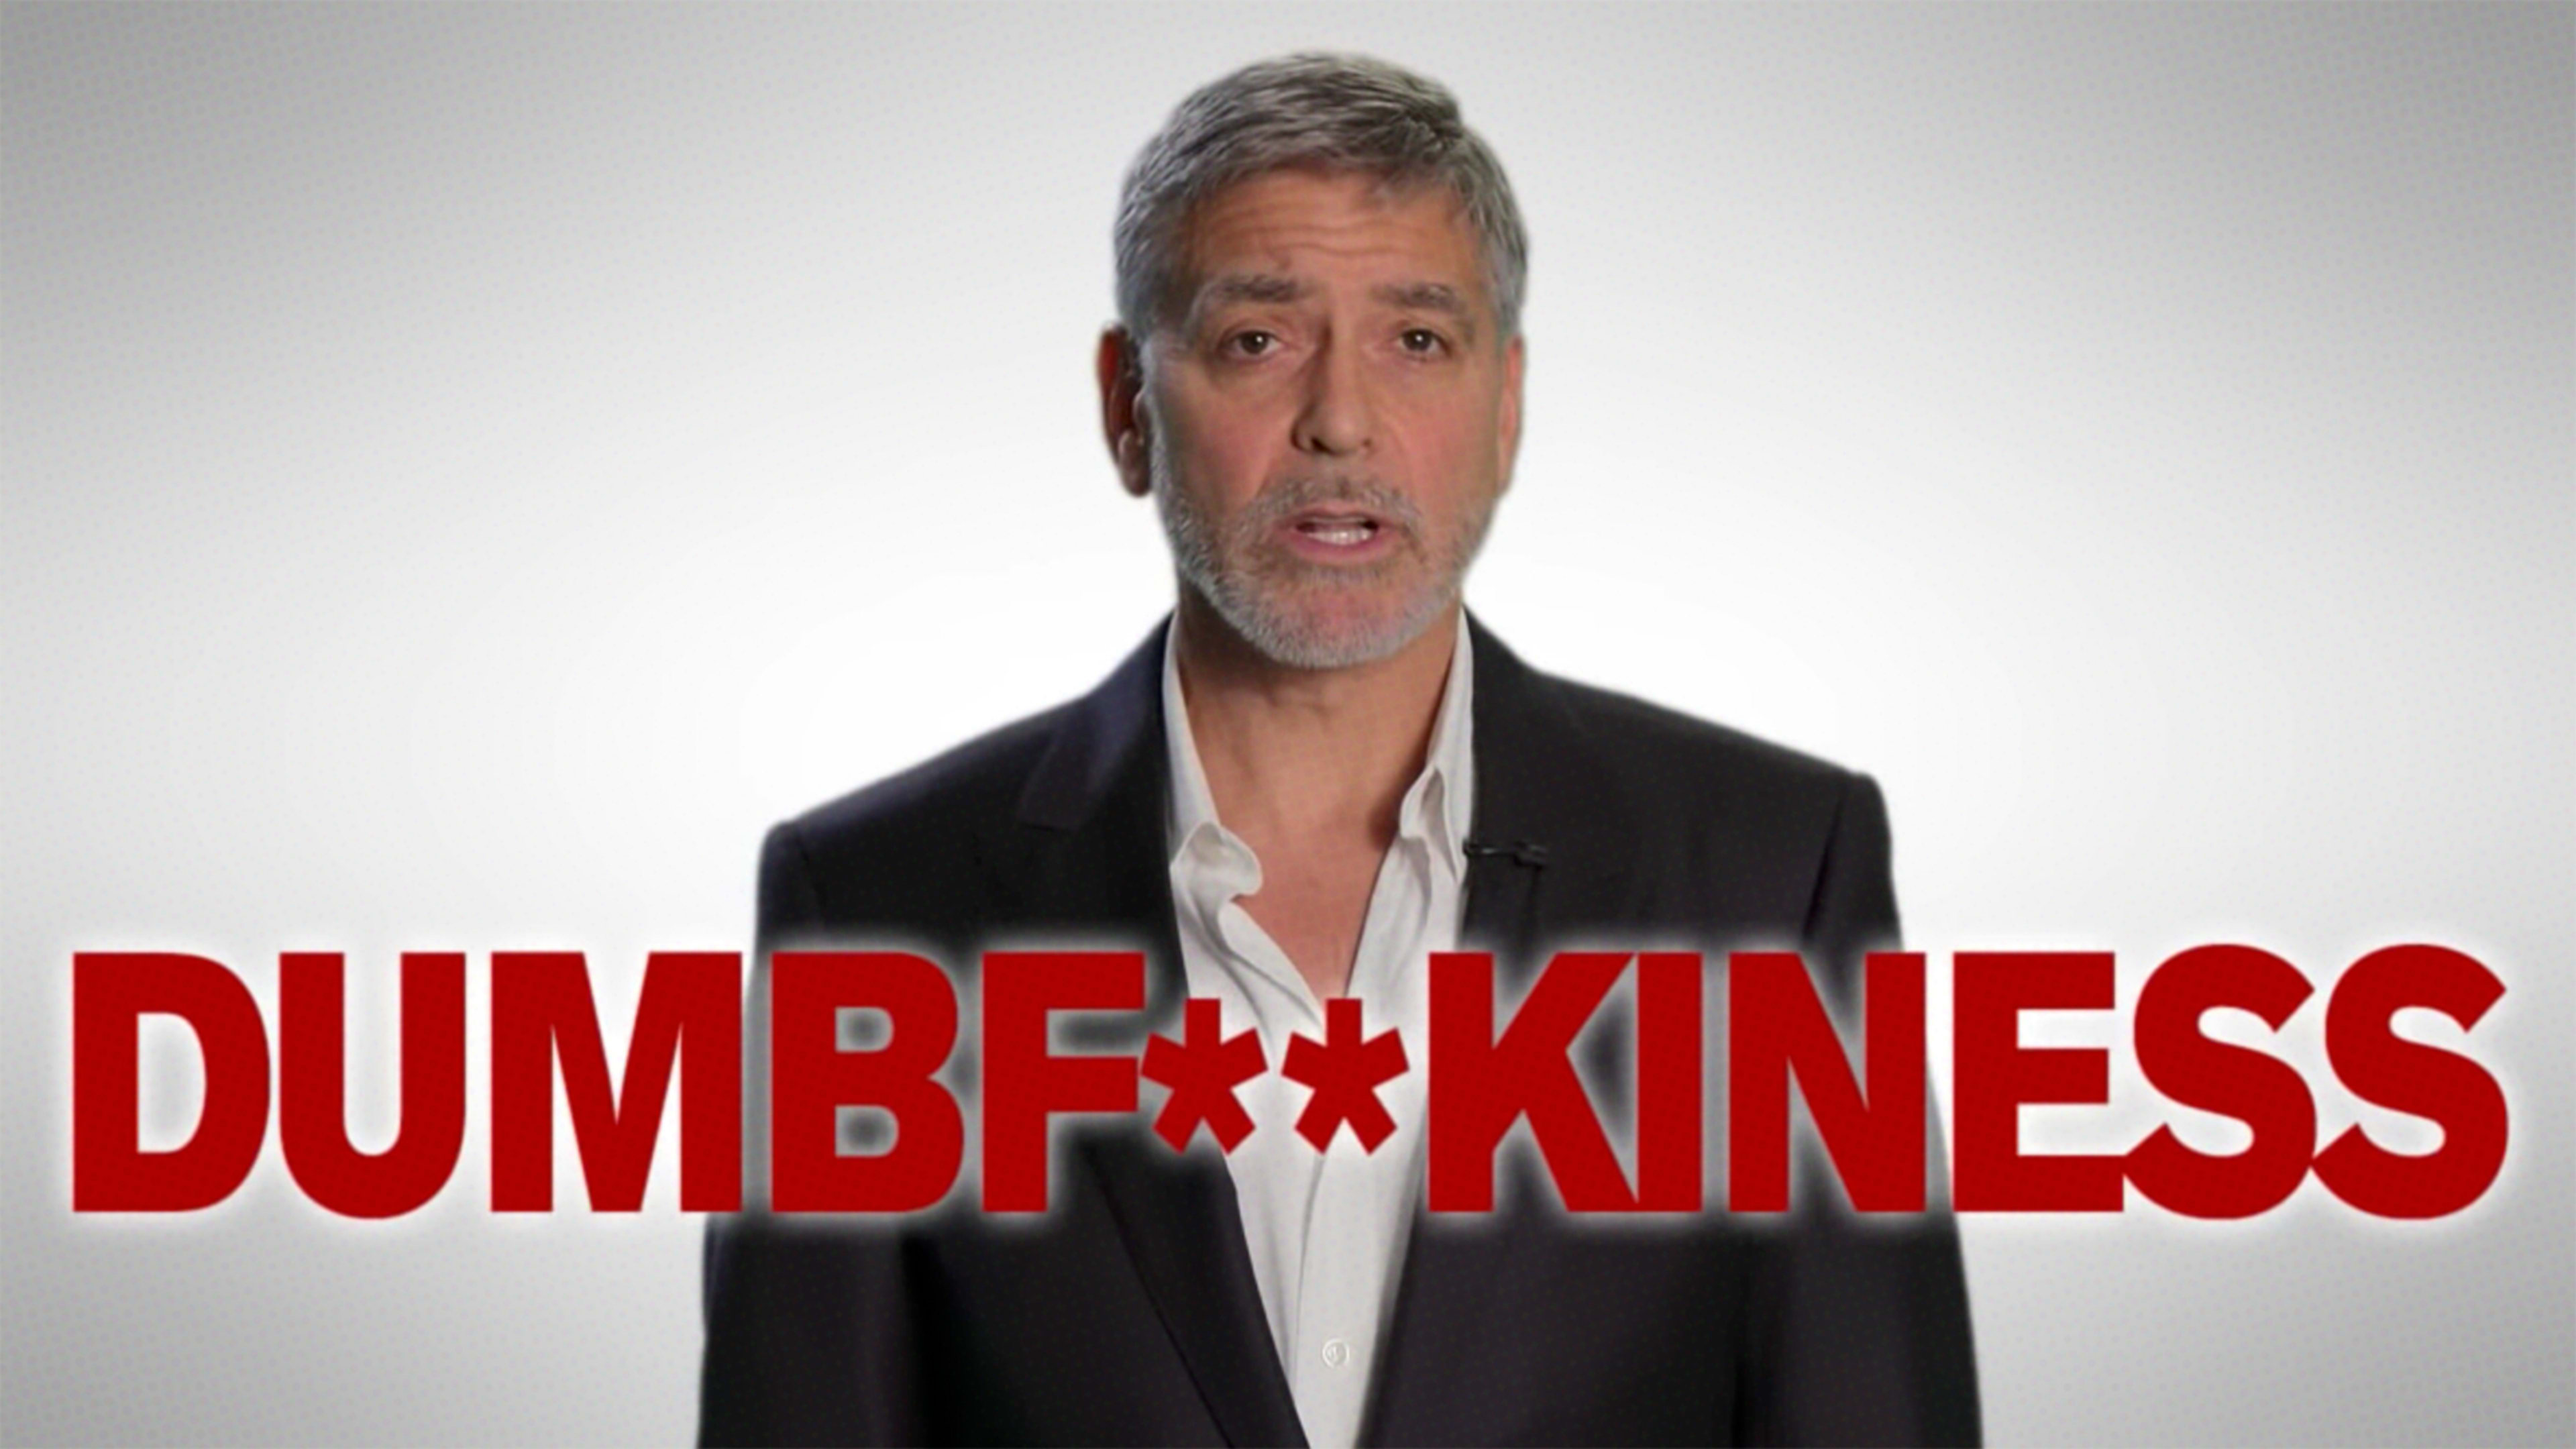 George Clooney releases PSA against climate change “dumbf**kery”